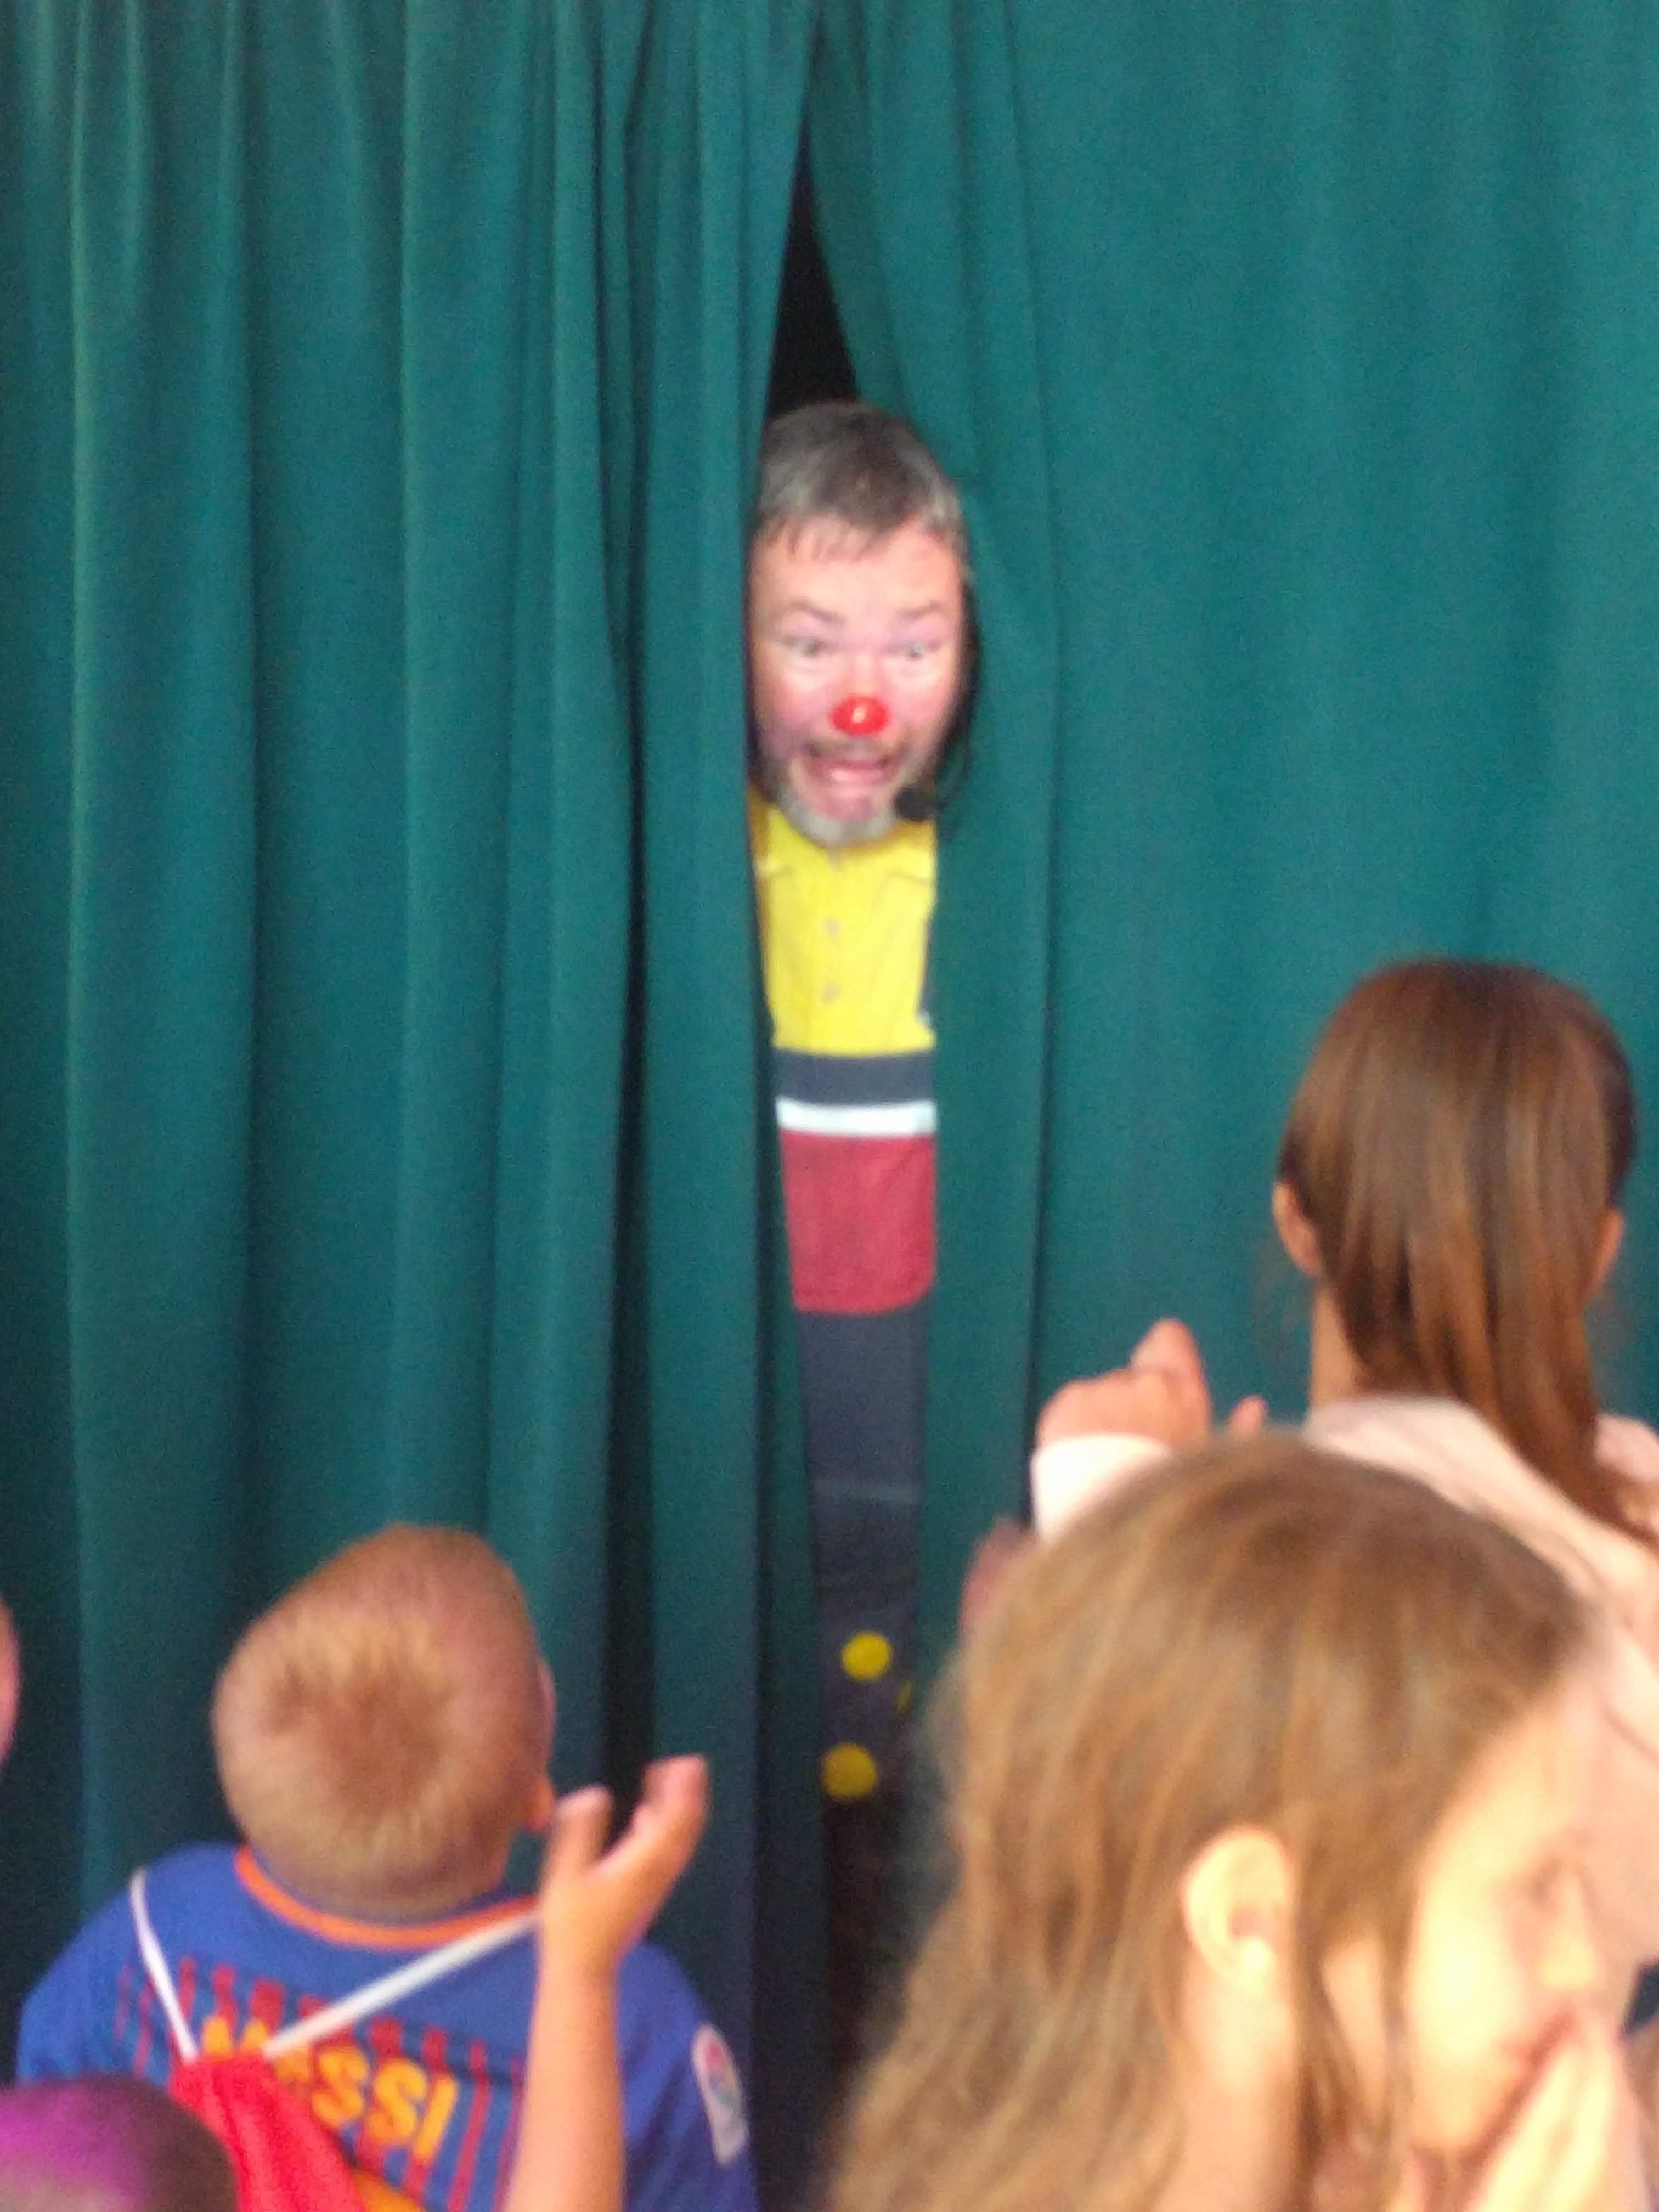 Curley Wurley Clown poking his nose through a stage curtain at some children